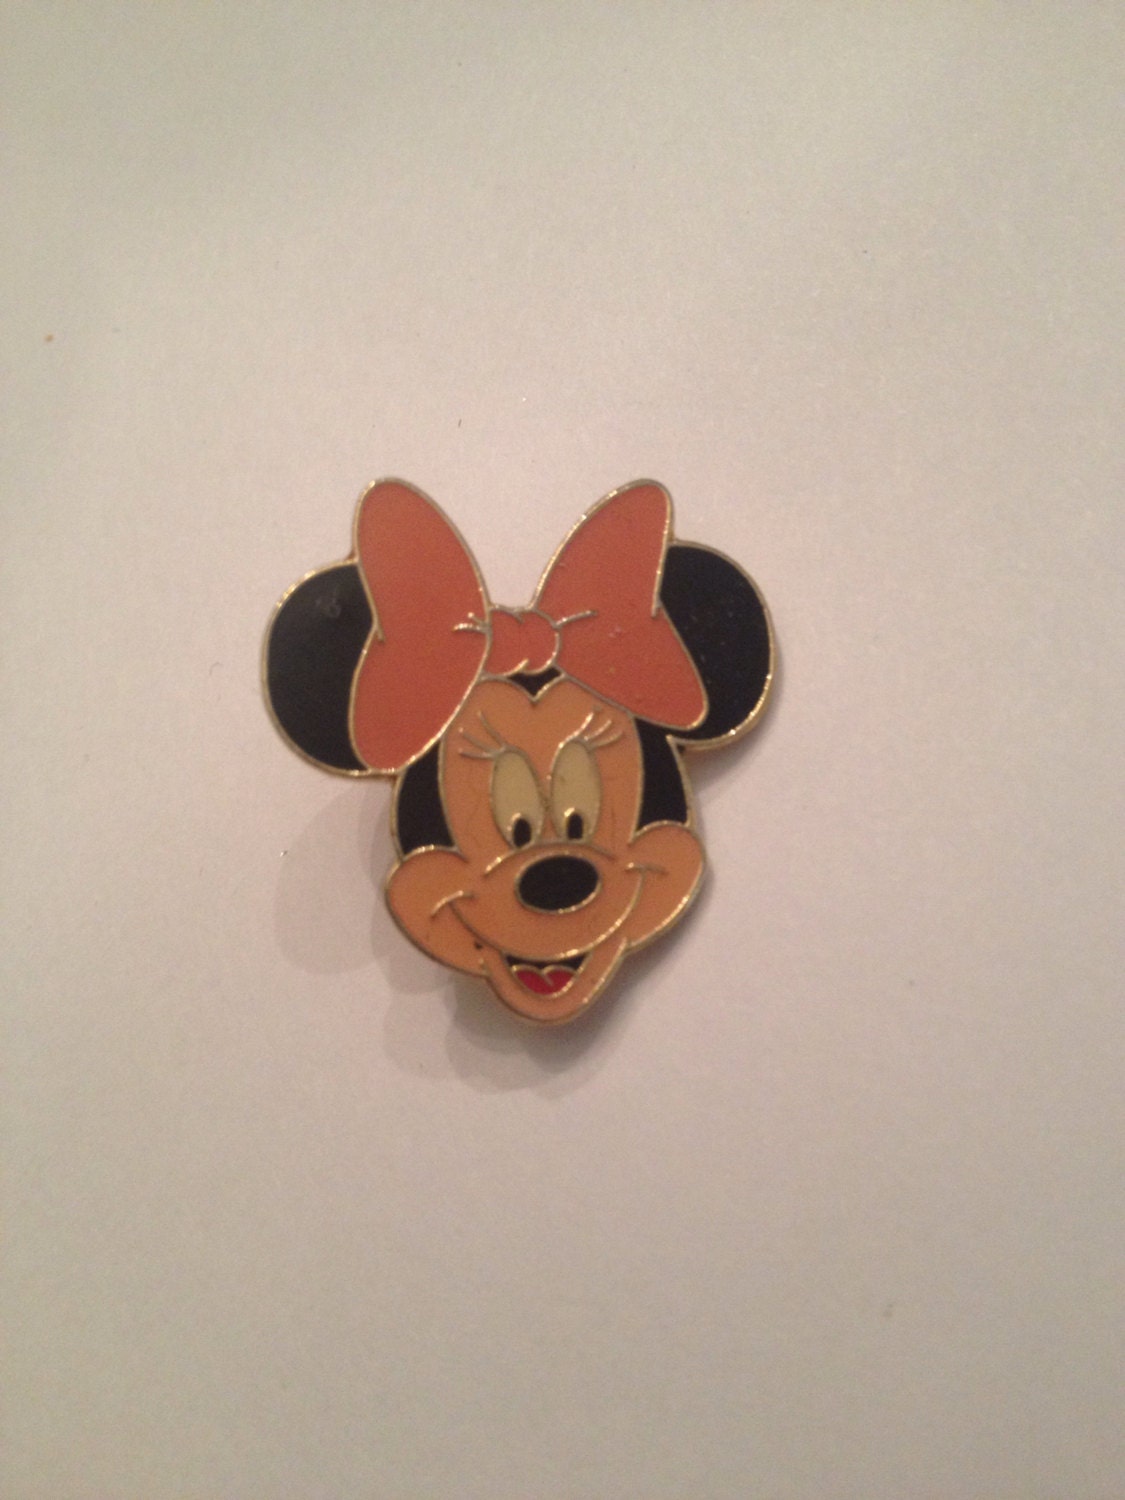 Vintage Minnie Mouse Disney Brooch Pin Collectable